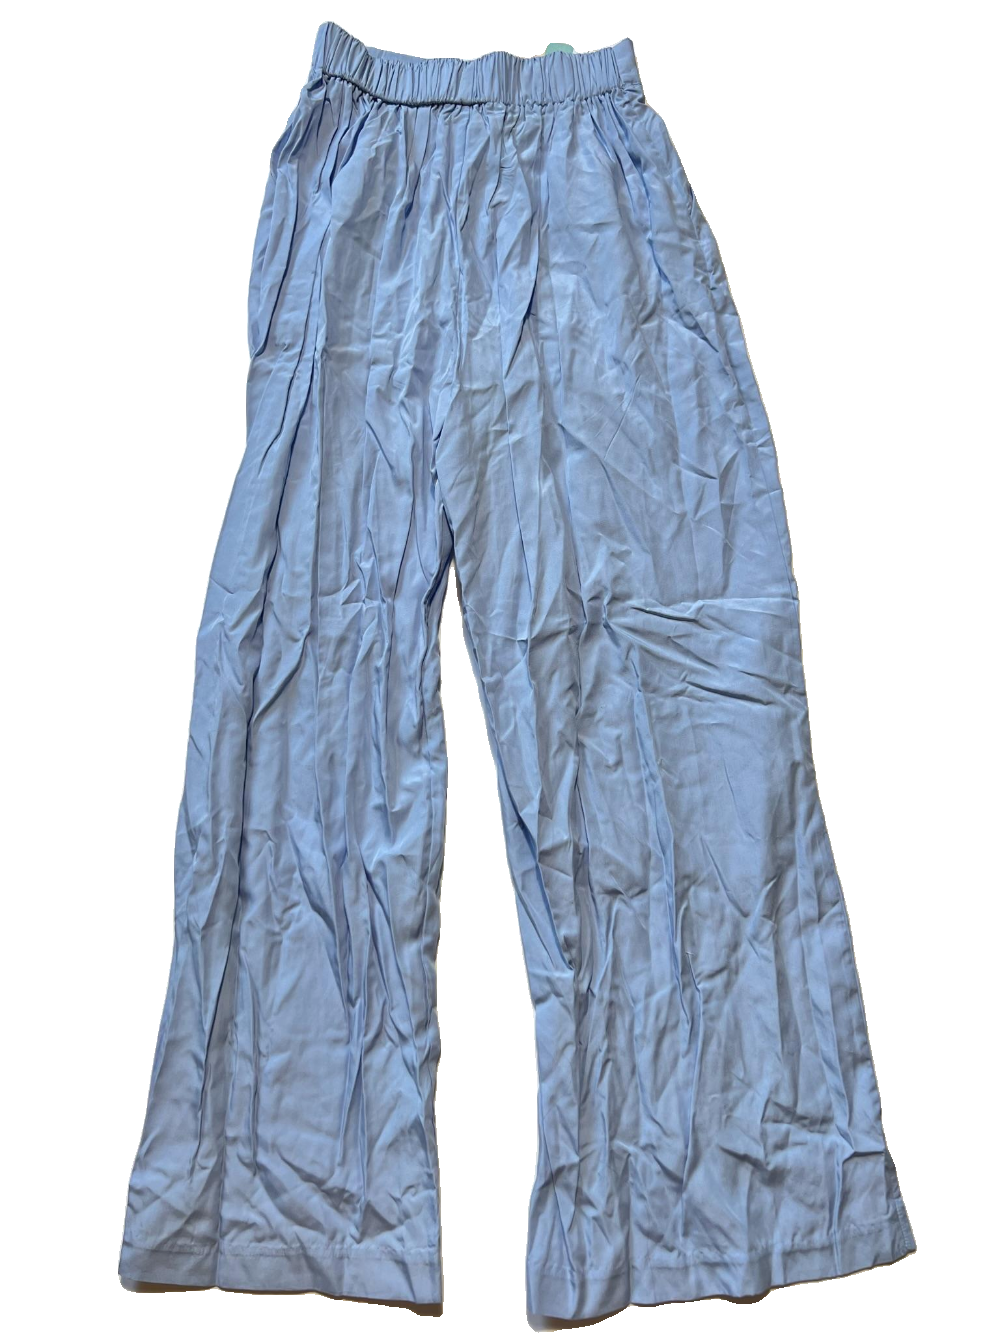 Storets - Light Blue Trousers - NEW WITH TAGS